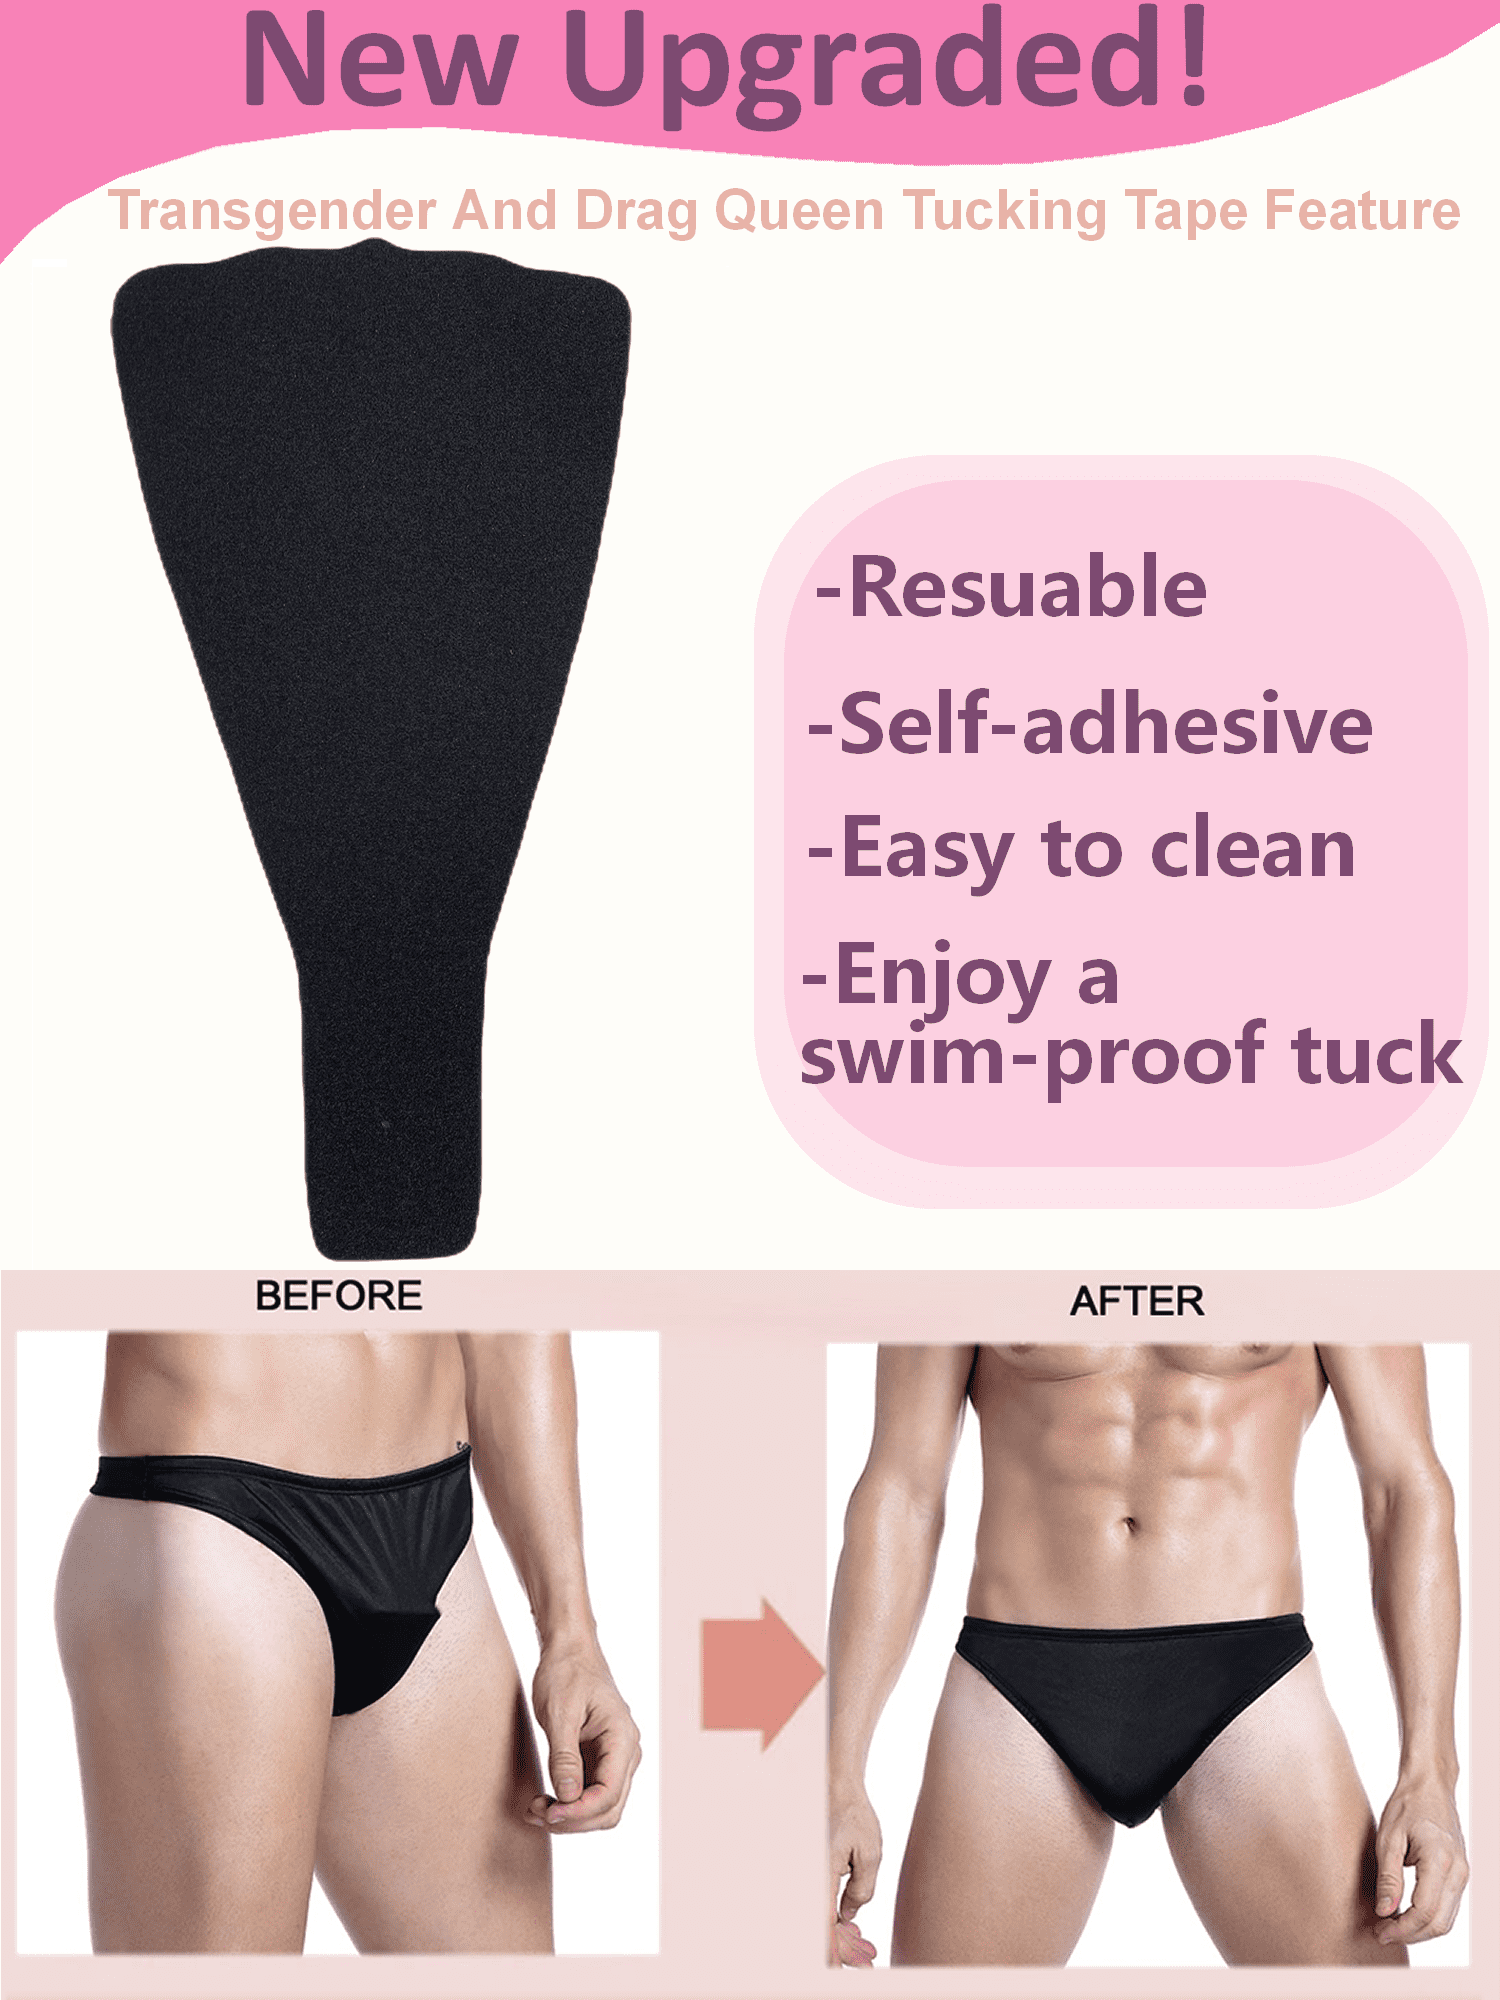 BIMEI Self-adhesive Reusable Tuck Yourself Tucking Tape Kit Pre-Cut  Self-contained Fit Skip the Line Adhesive Avoid Camel Toe Gaff Alternative  Waterproof For Unisex,Black,A Pair 